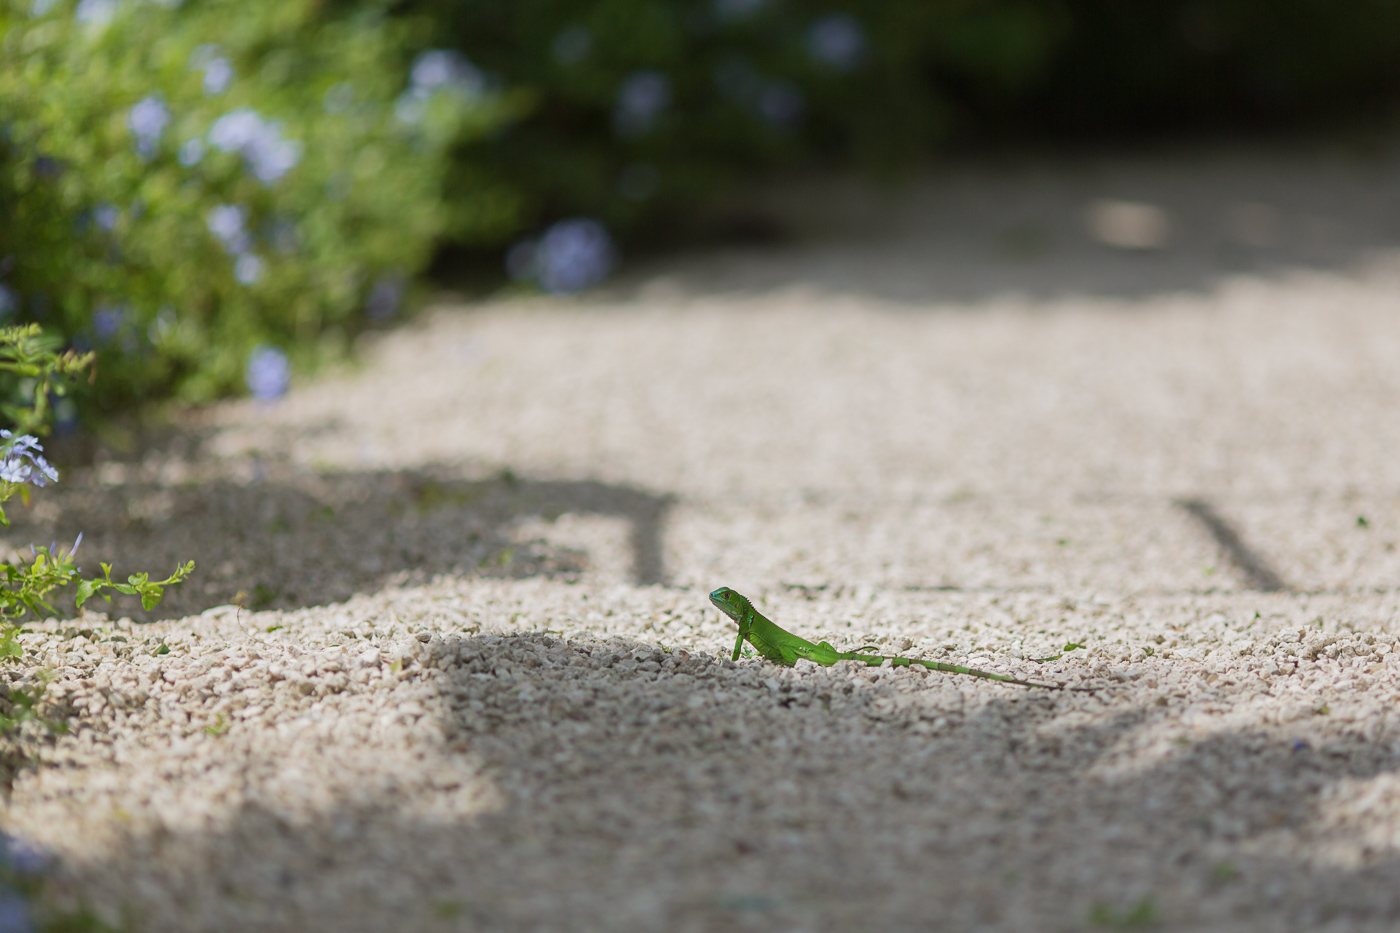 Baby green iguana on Grand Cayman Island. The species is considered invasive and is not native to the island.